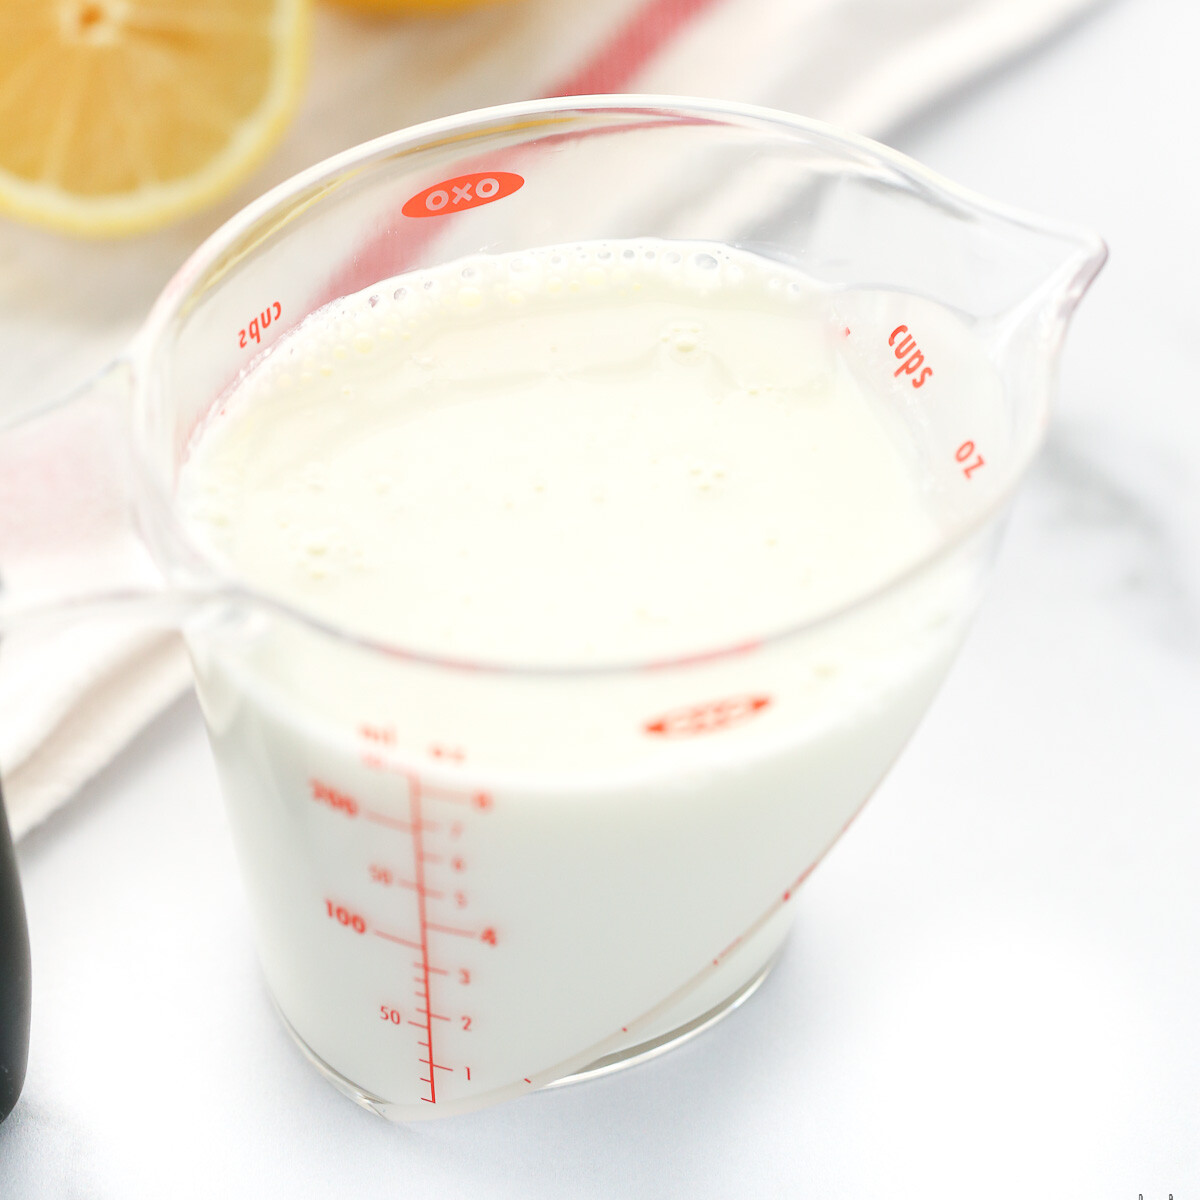 how many calories in 1/4 cup of buttermilk?